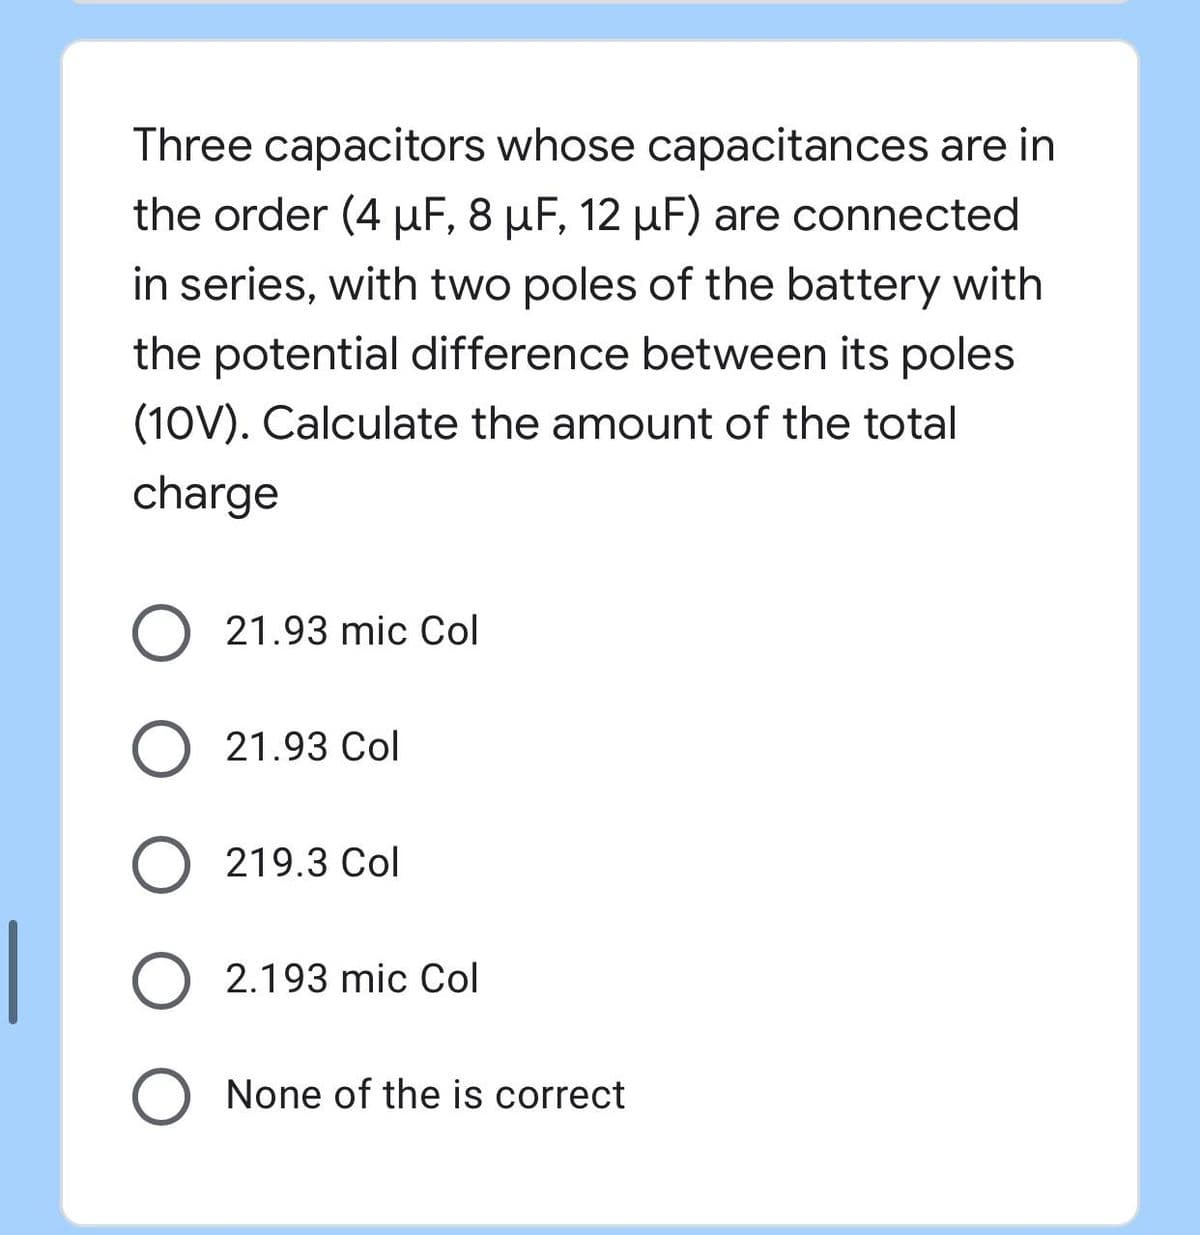 Three capacitors whose capacitances are in
the order (4 µF, 8 µF, 12 µF) are connected
in series, with two poles of the battery with
the potential difference between its poles
(10V). Calculate the amount of the total
charge
O 21.93 mic Col
O 21.93 Col
O 219.3 Col
O 2.193 mic Col
O None of the is correct